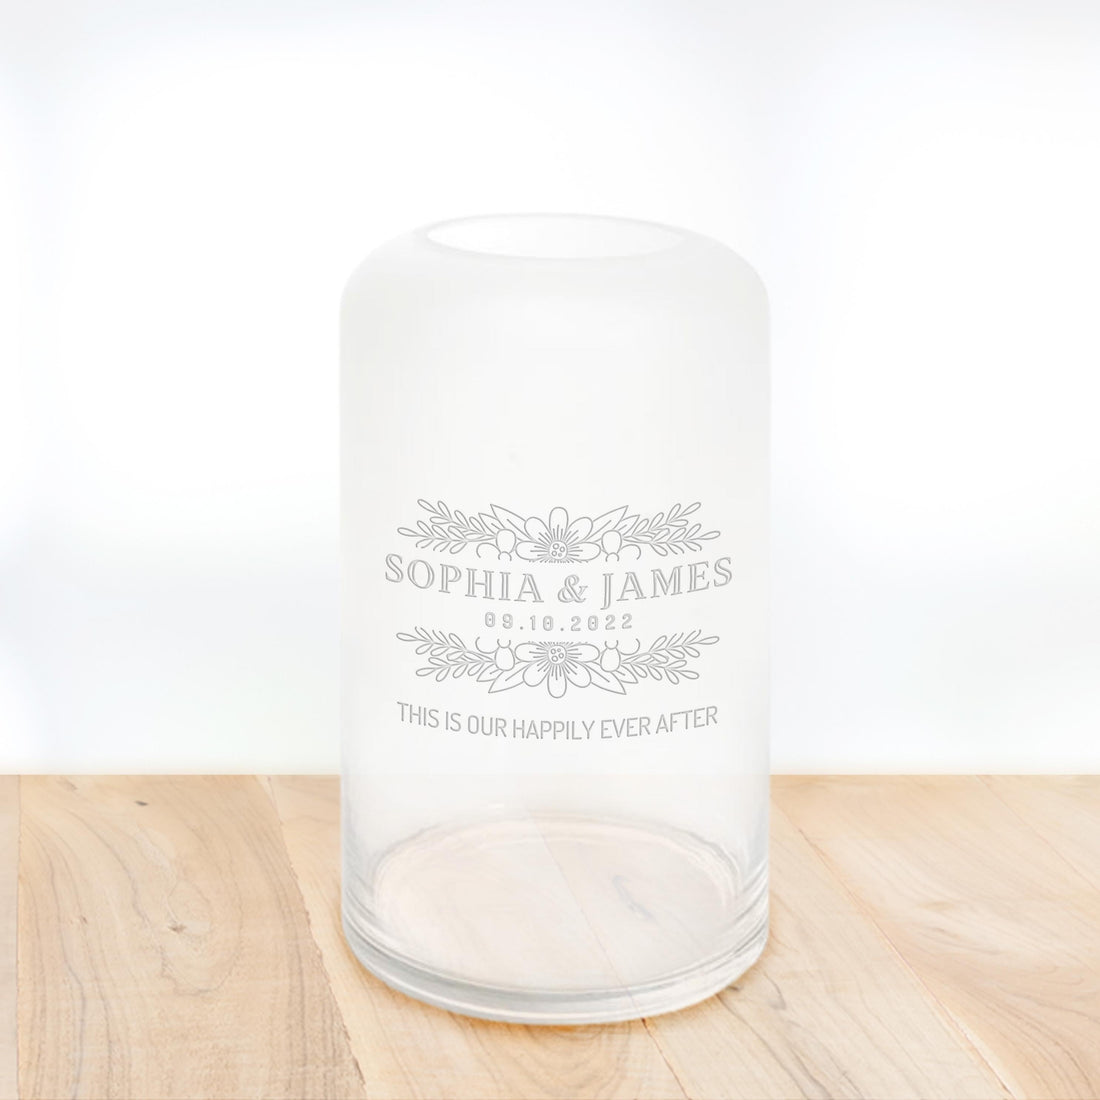 Personalised Large Curved Cylinder Frosted Clear Glass Vase, Custom Engraved Memorial Wedding Gift for Bridesmaid, Mother of Bride/ Groom, Housewarming, Anniversary